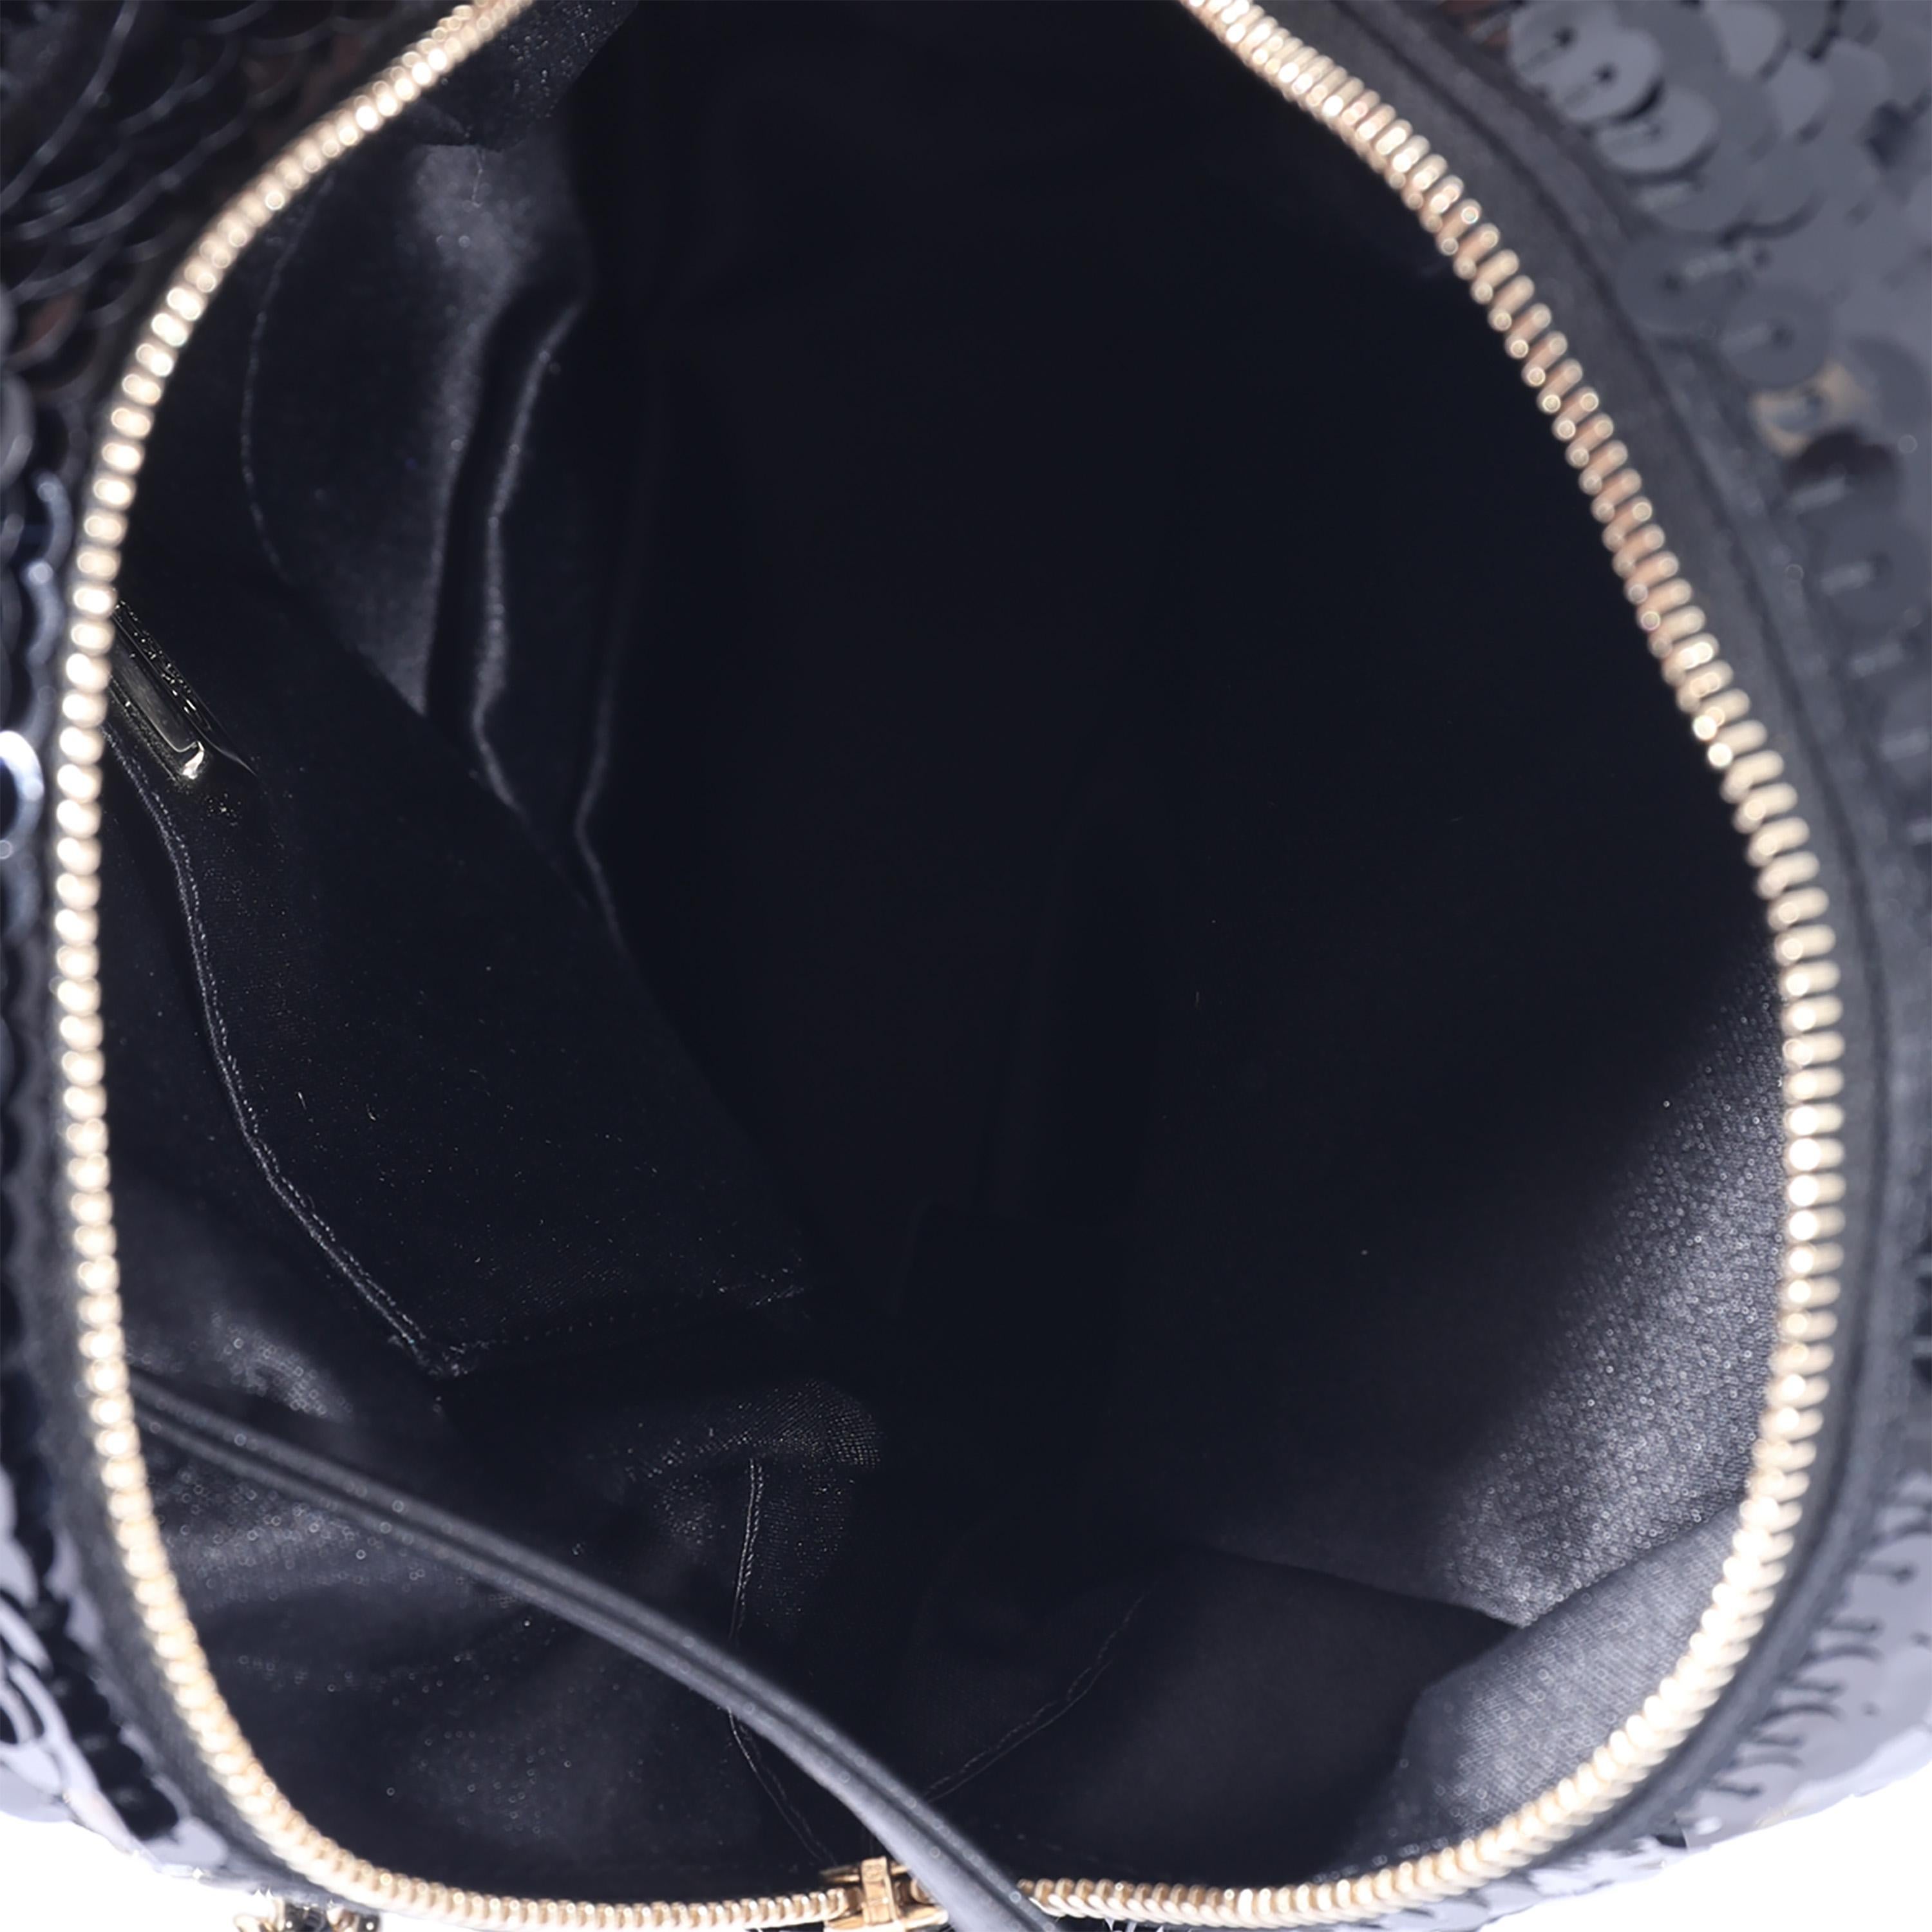 Listing Title: Chanel Black Sequin & Lambskin Small Backpack
SKU: 127888
Condition: Pre-owned 
Handbag Condition: Very Good
Condition Comments: Very Good Condition. Light scuffing to corners and lambskin. Light scuffing to interior leather.
Brand: